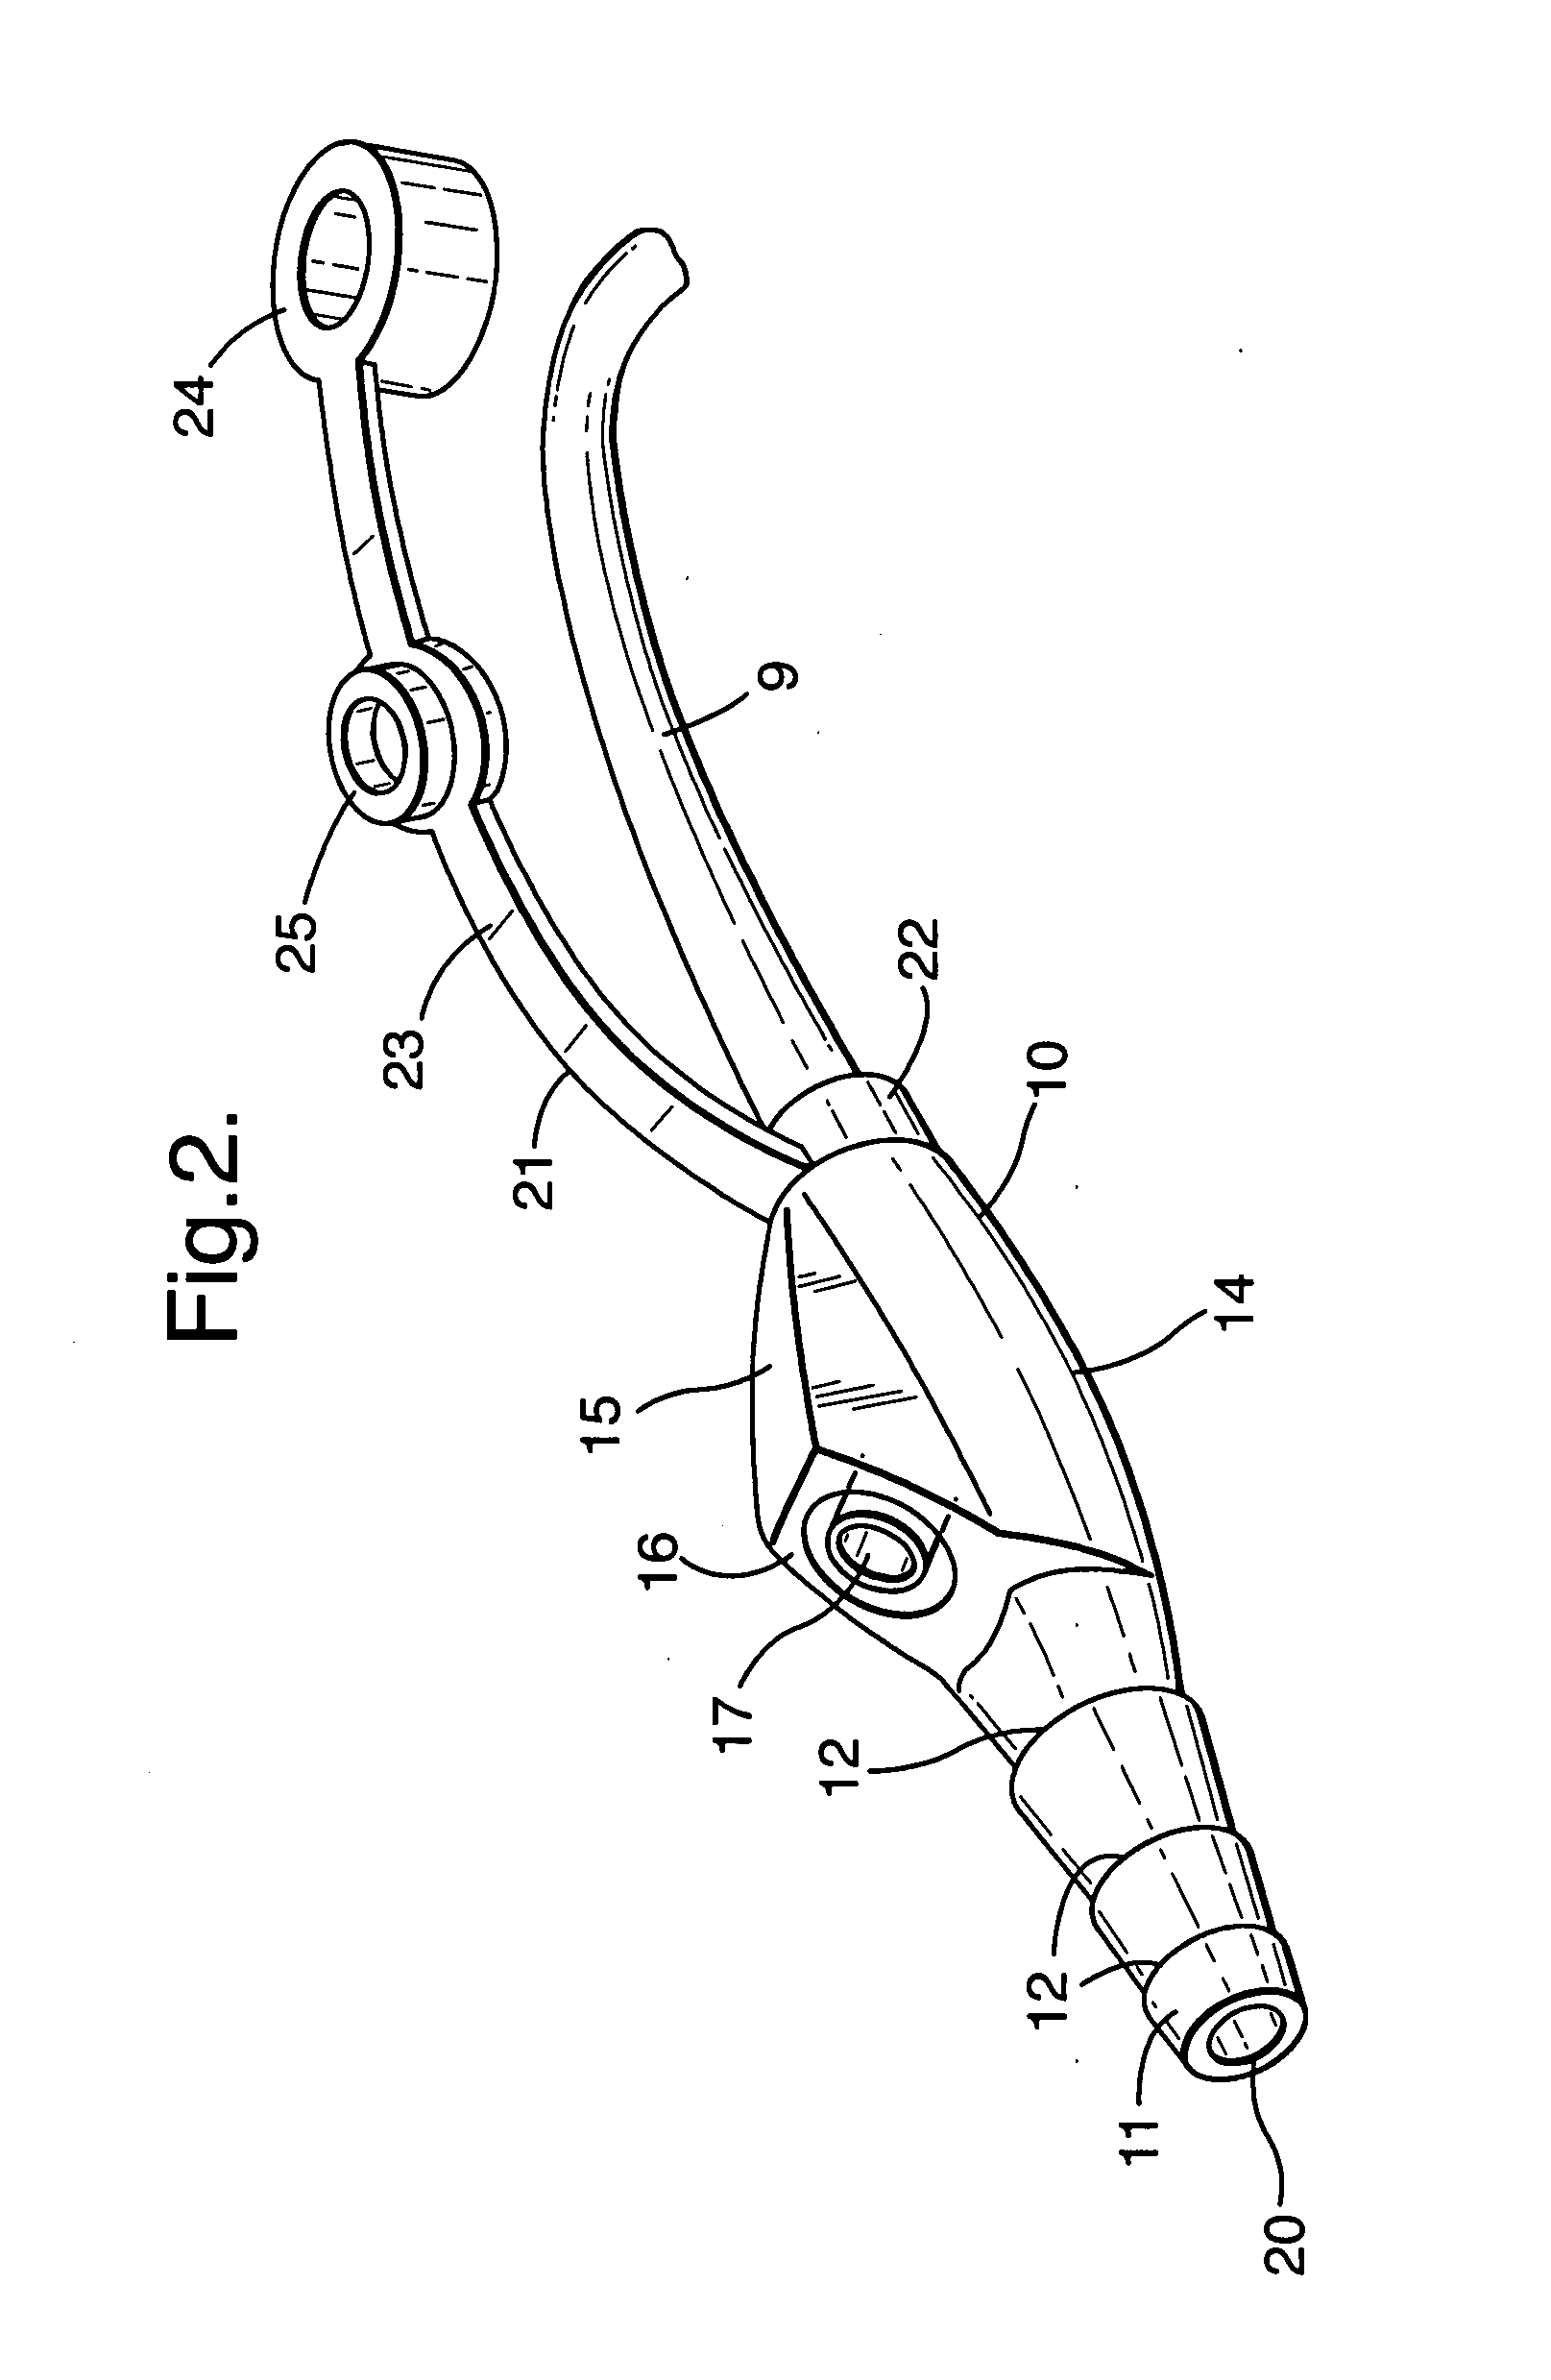 Suction apparatus and connectors